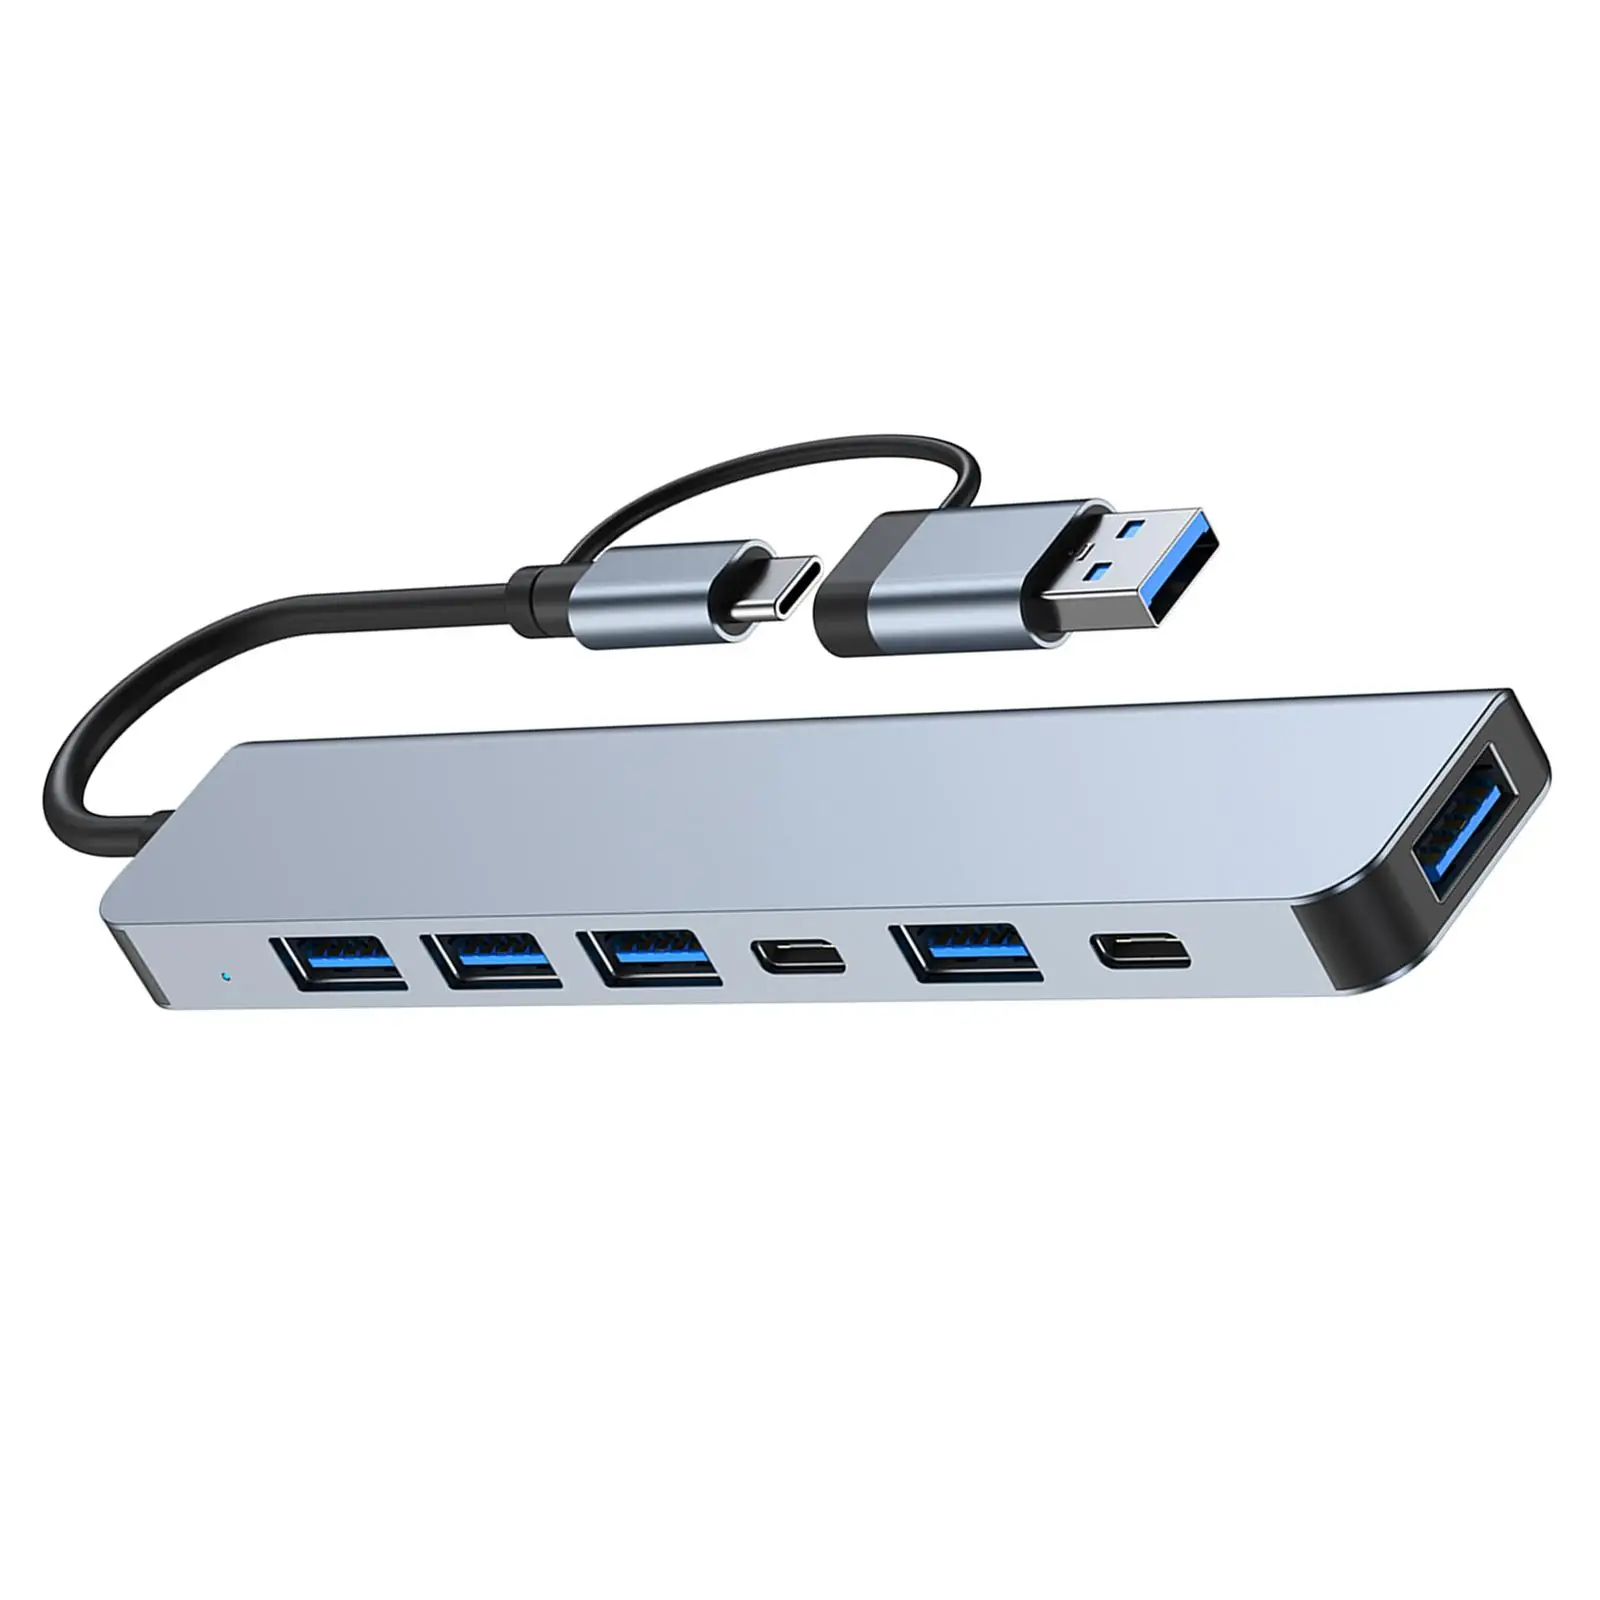 Portable USB Type C Hub Aluminum Alloy with A 5W Charging Port Docking Station Multiport Adapter Converter for Keyboard Laptop